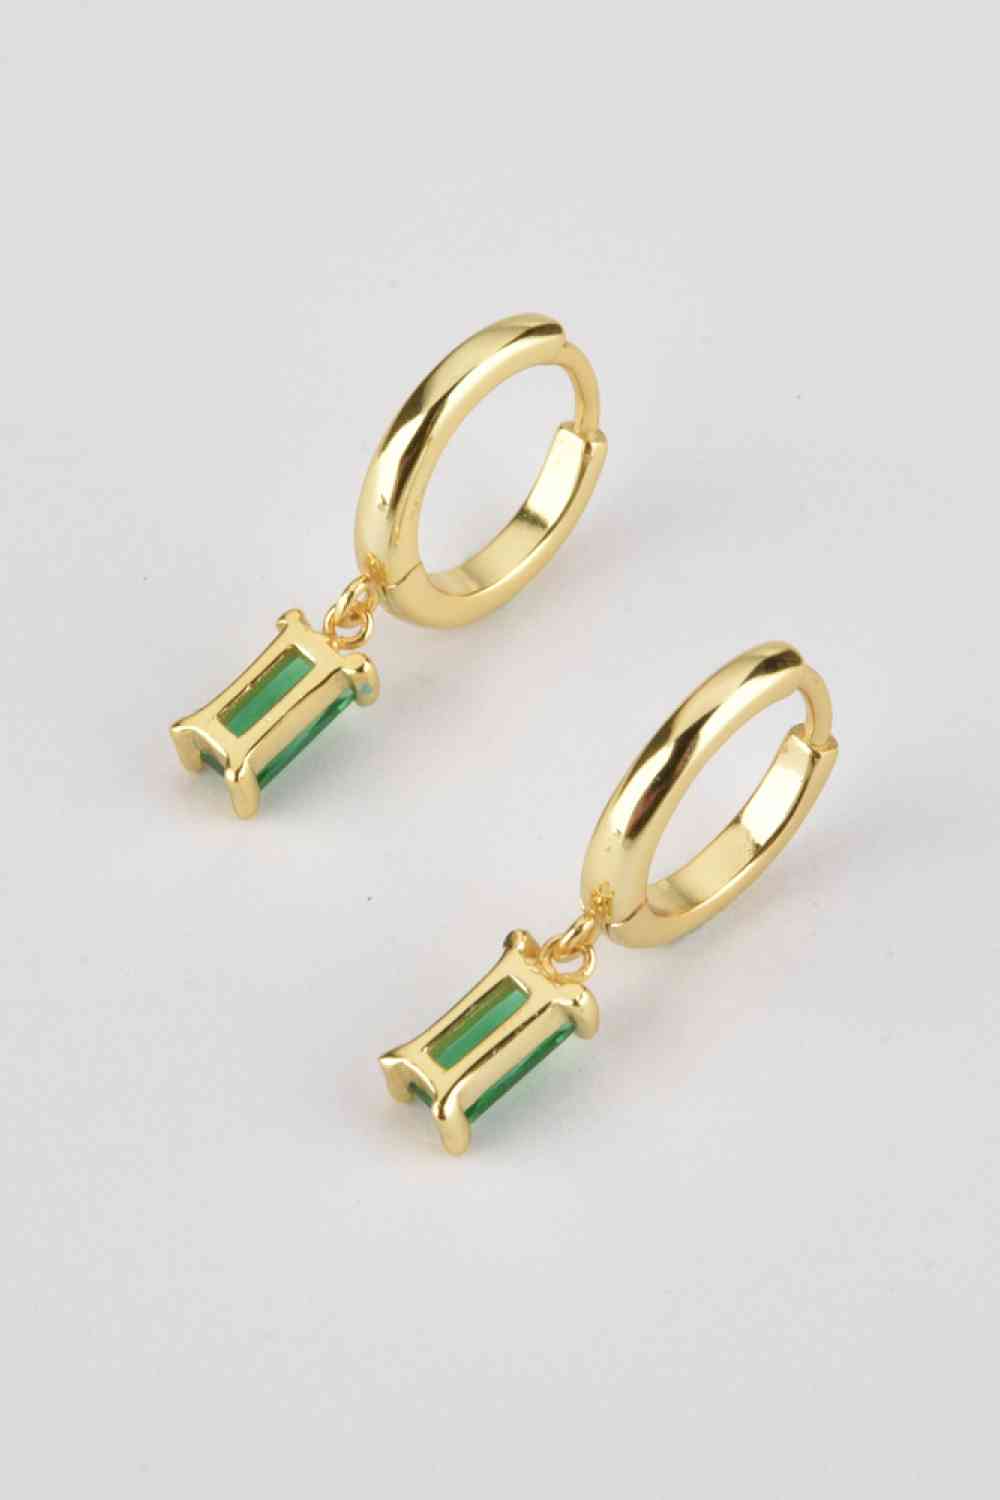 ZIRCON and STERLING SILVER HUGGIE DROP EARRINGS in Platinum or 18K Gold plated finish